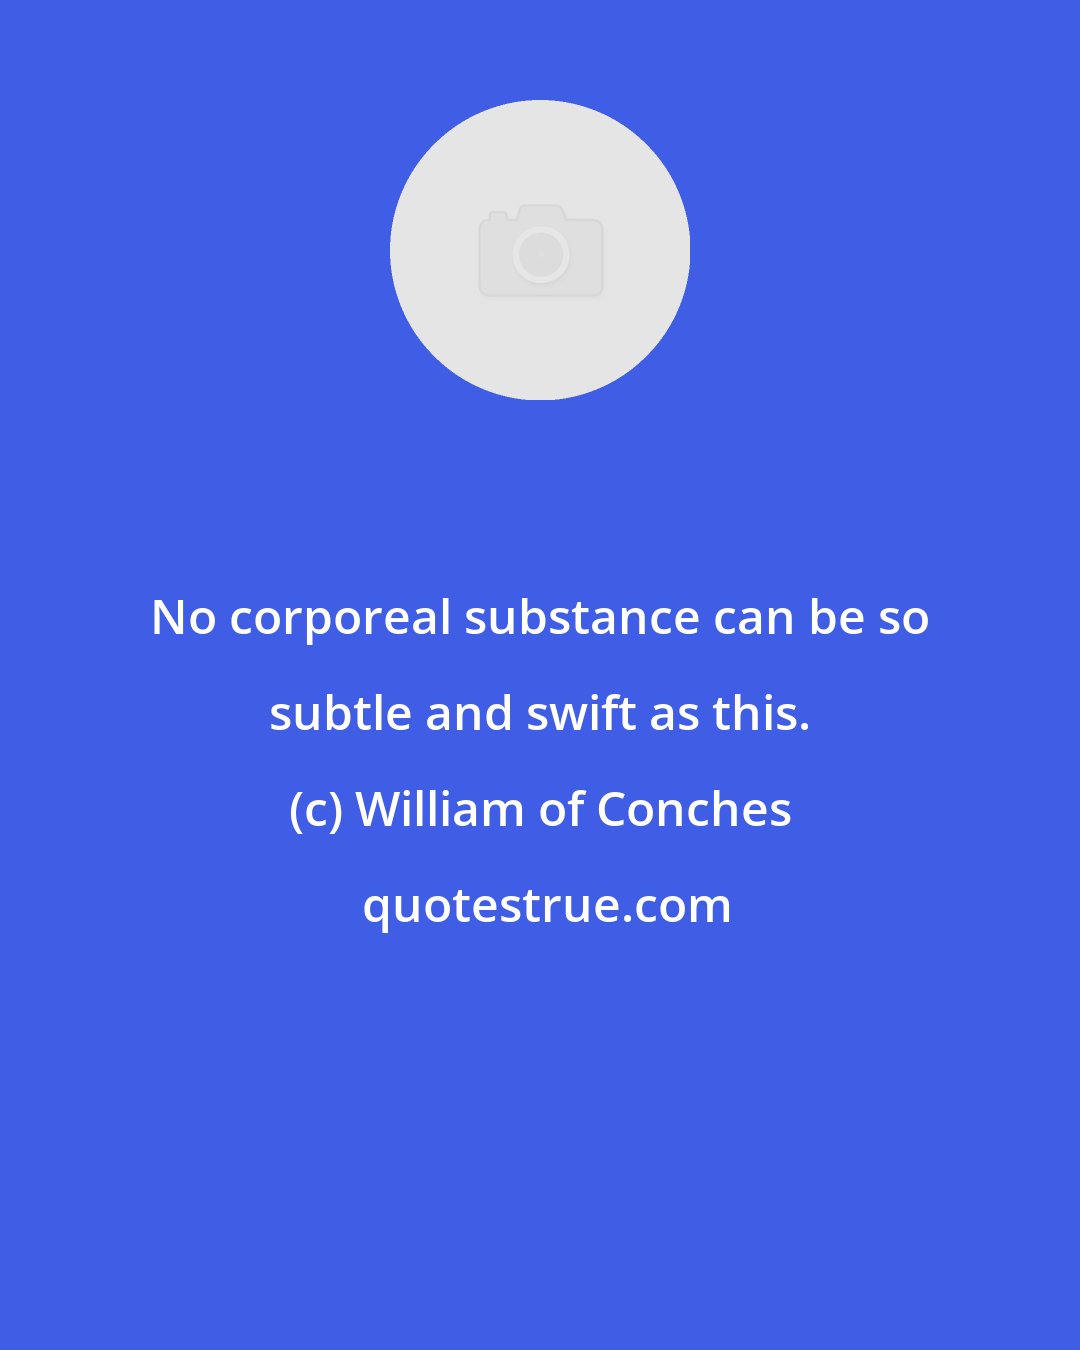 William of Conches: No corporeal substance can be so subtle and swift as this.